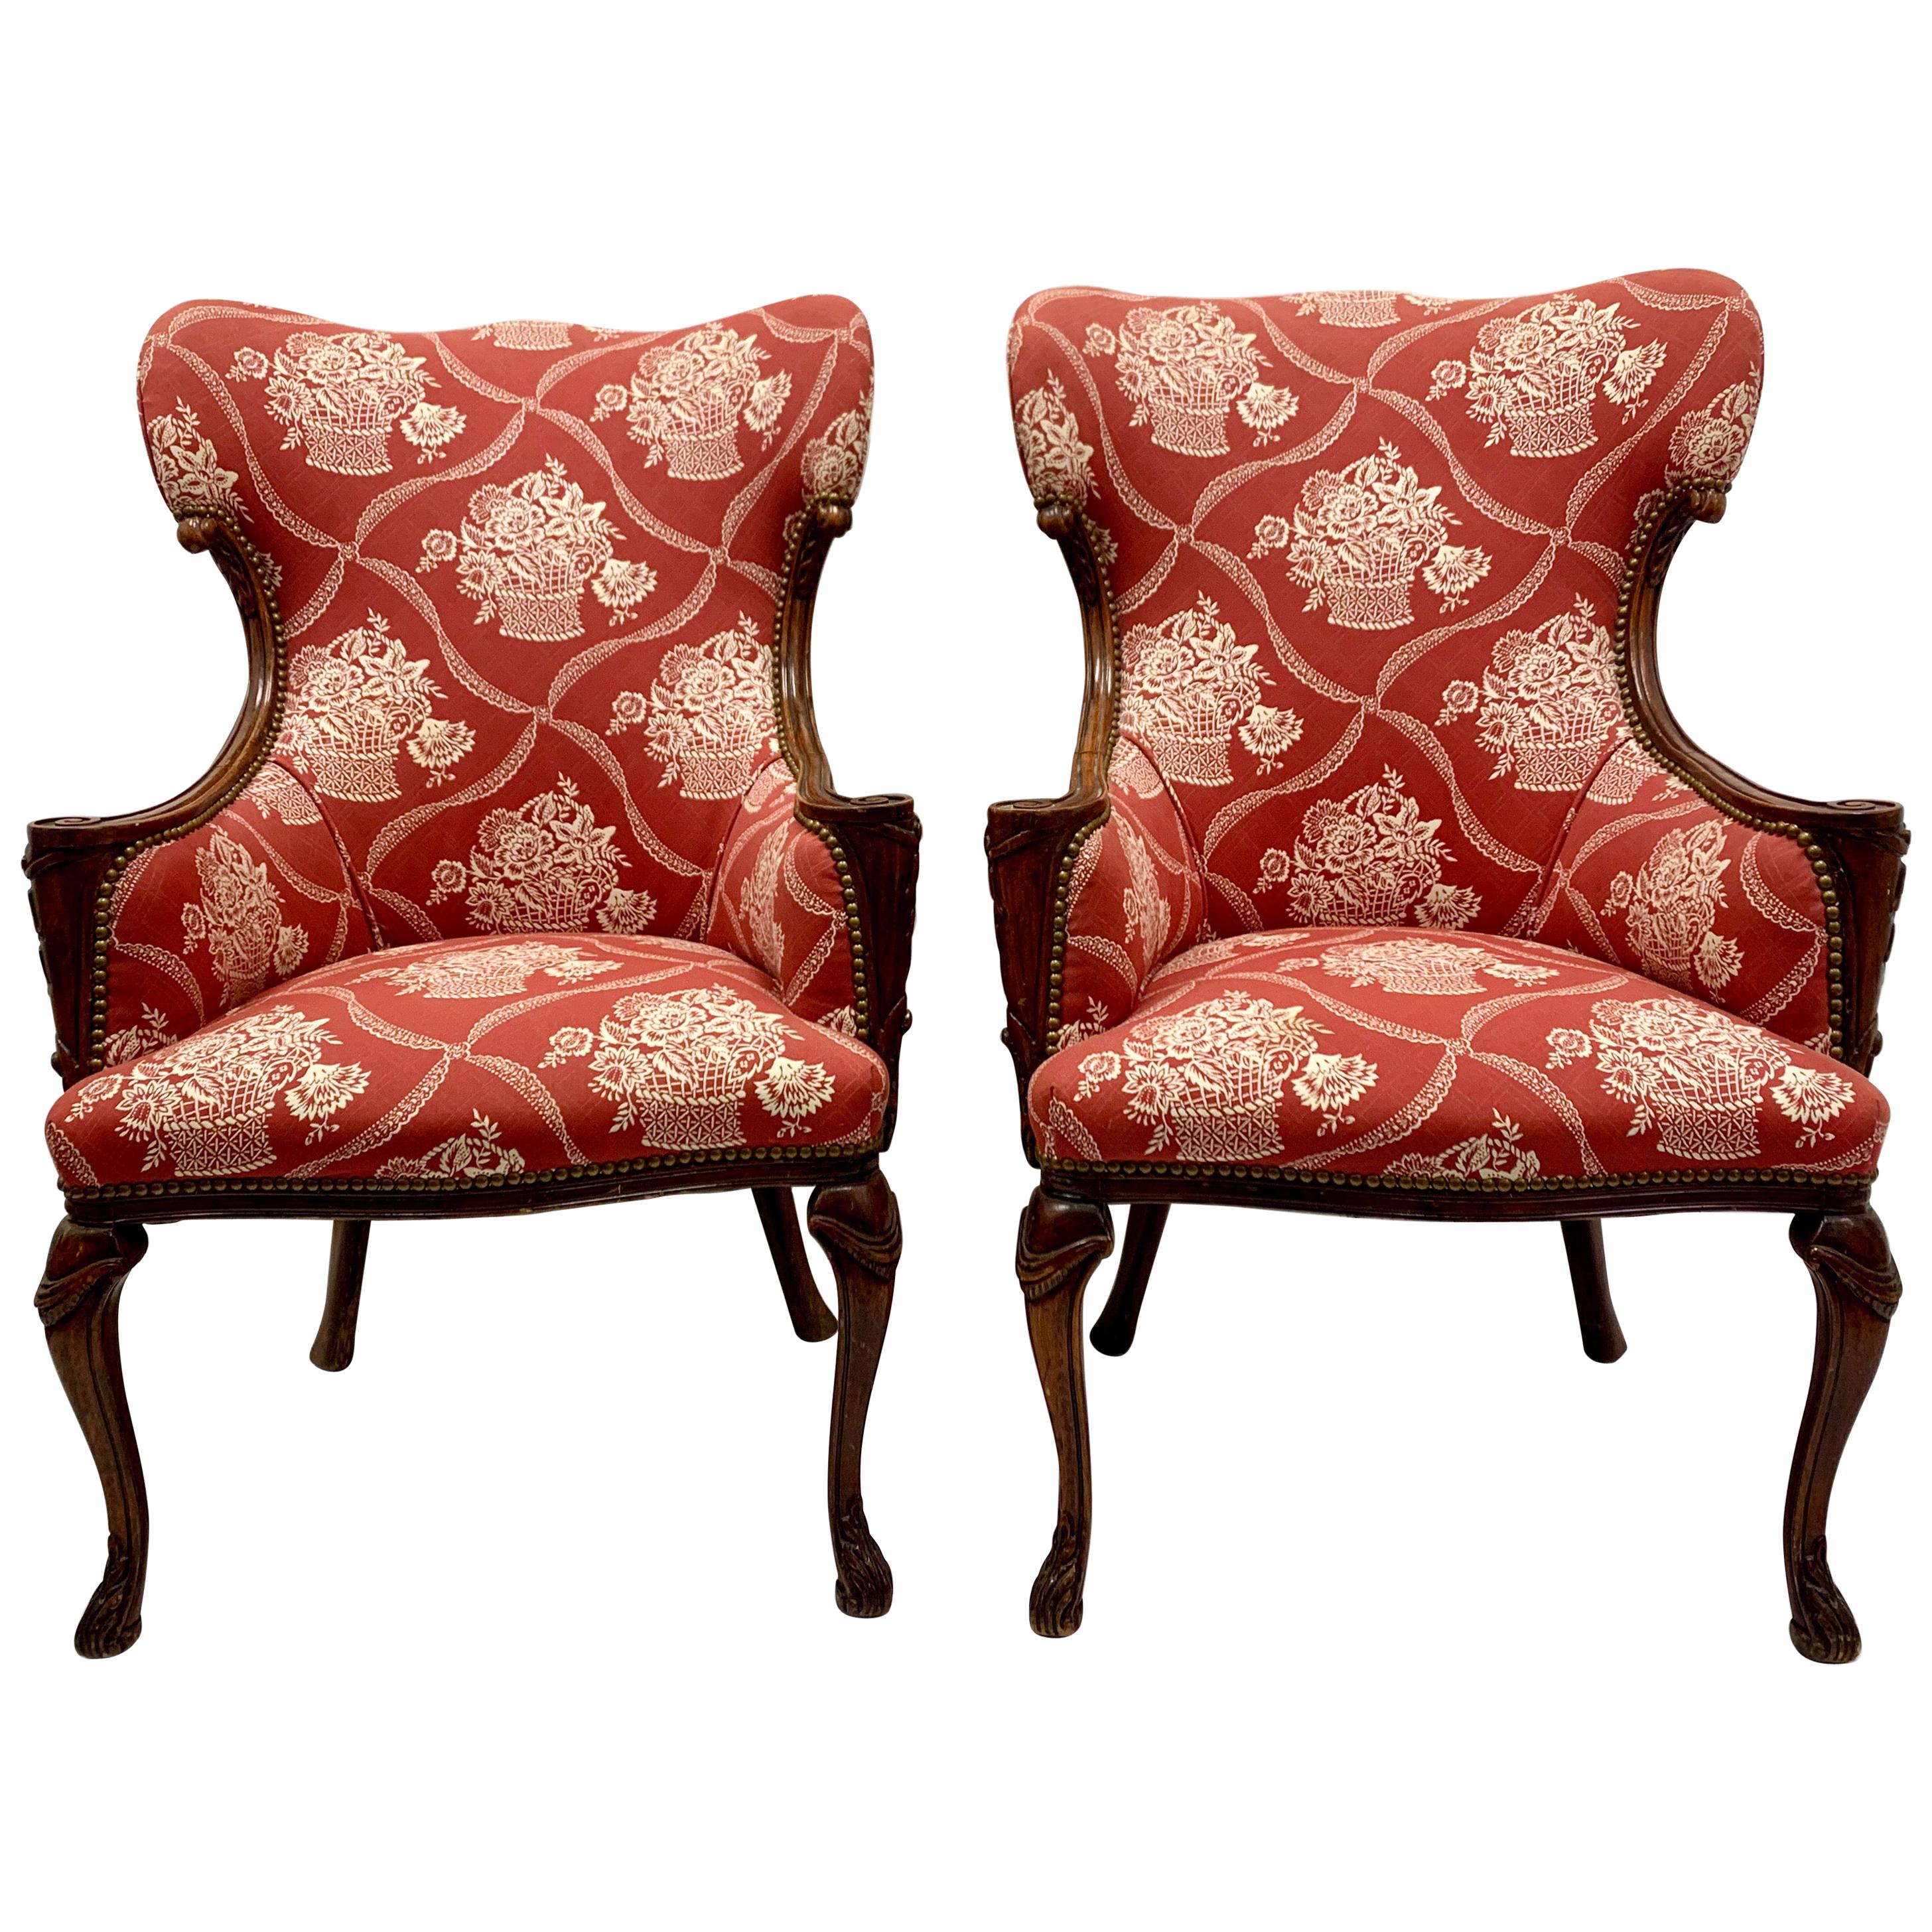 Antique French Carved Mahogany Wing Chairs in Schumacher Fabric, Pair